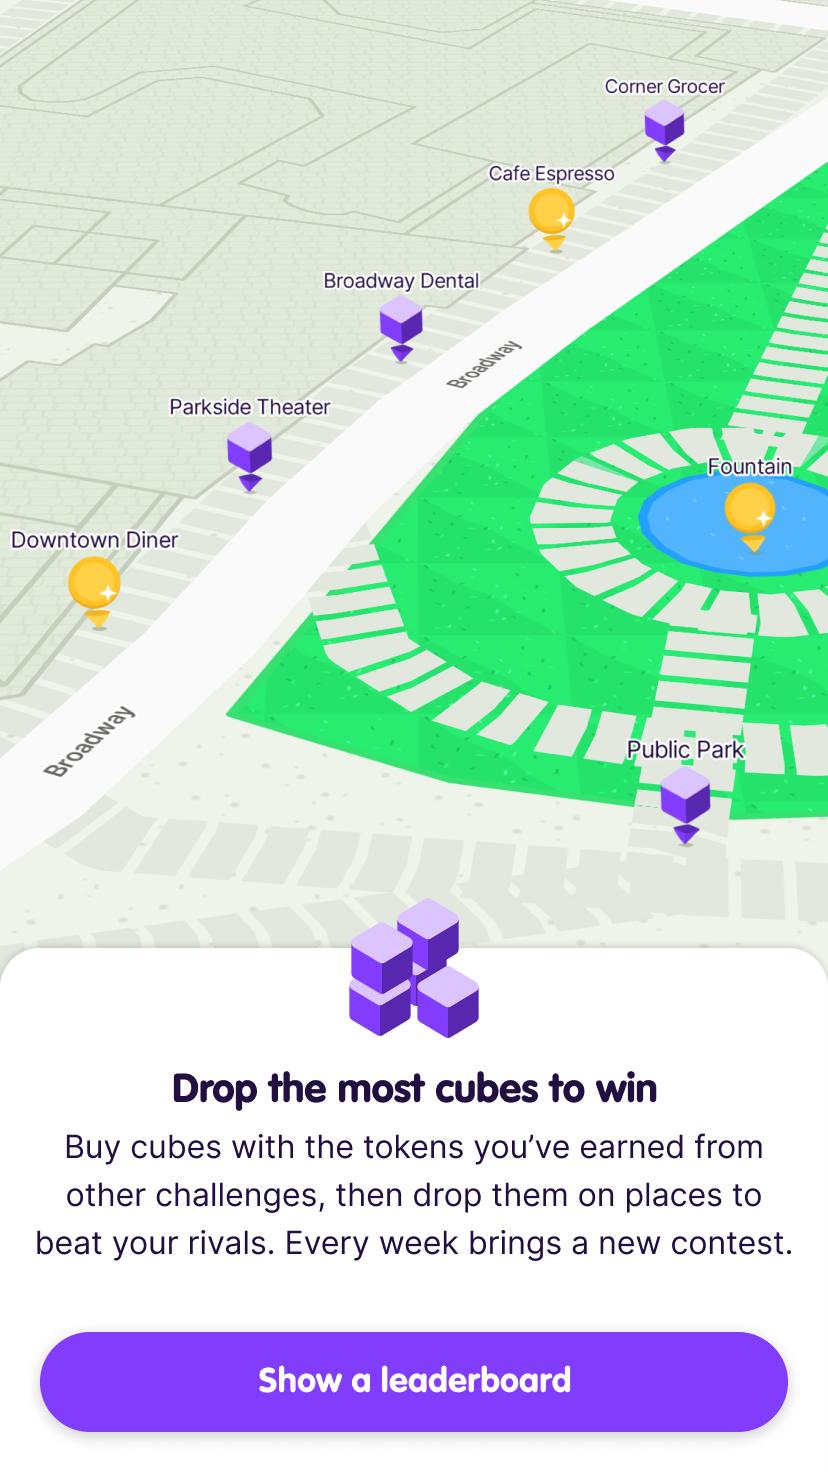 Screenshot from the app intro showing places the user has dropped cubes on the map and prompting the user to tap a button to Show a leaderboard.